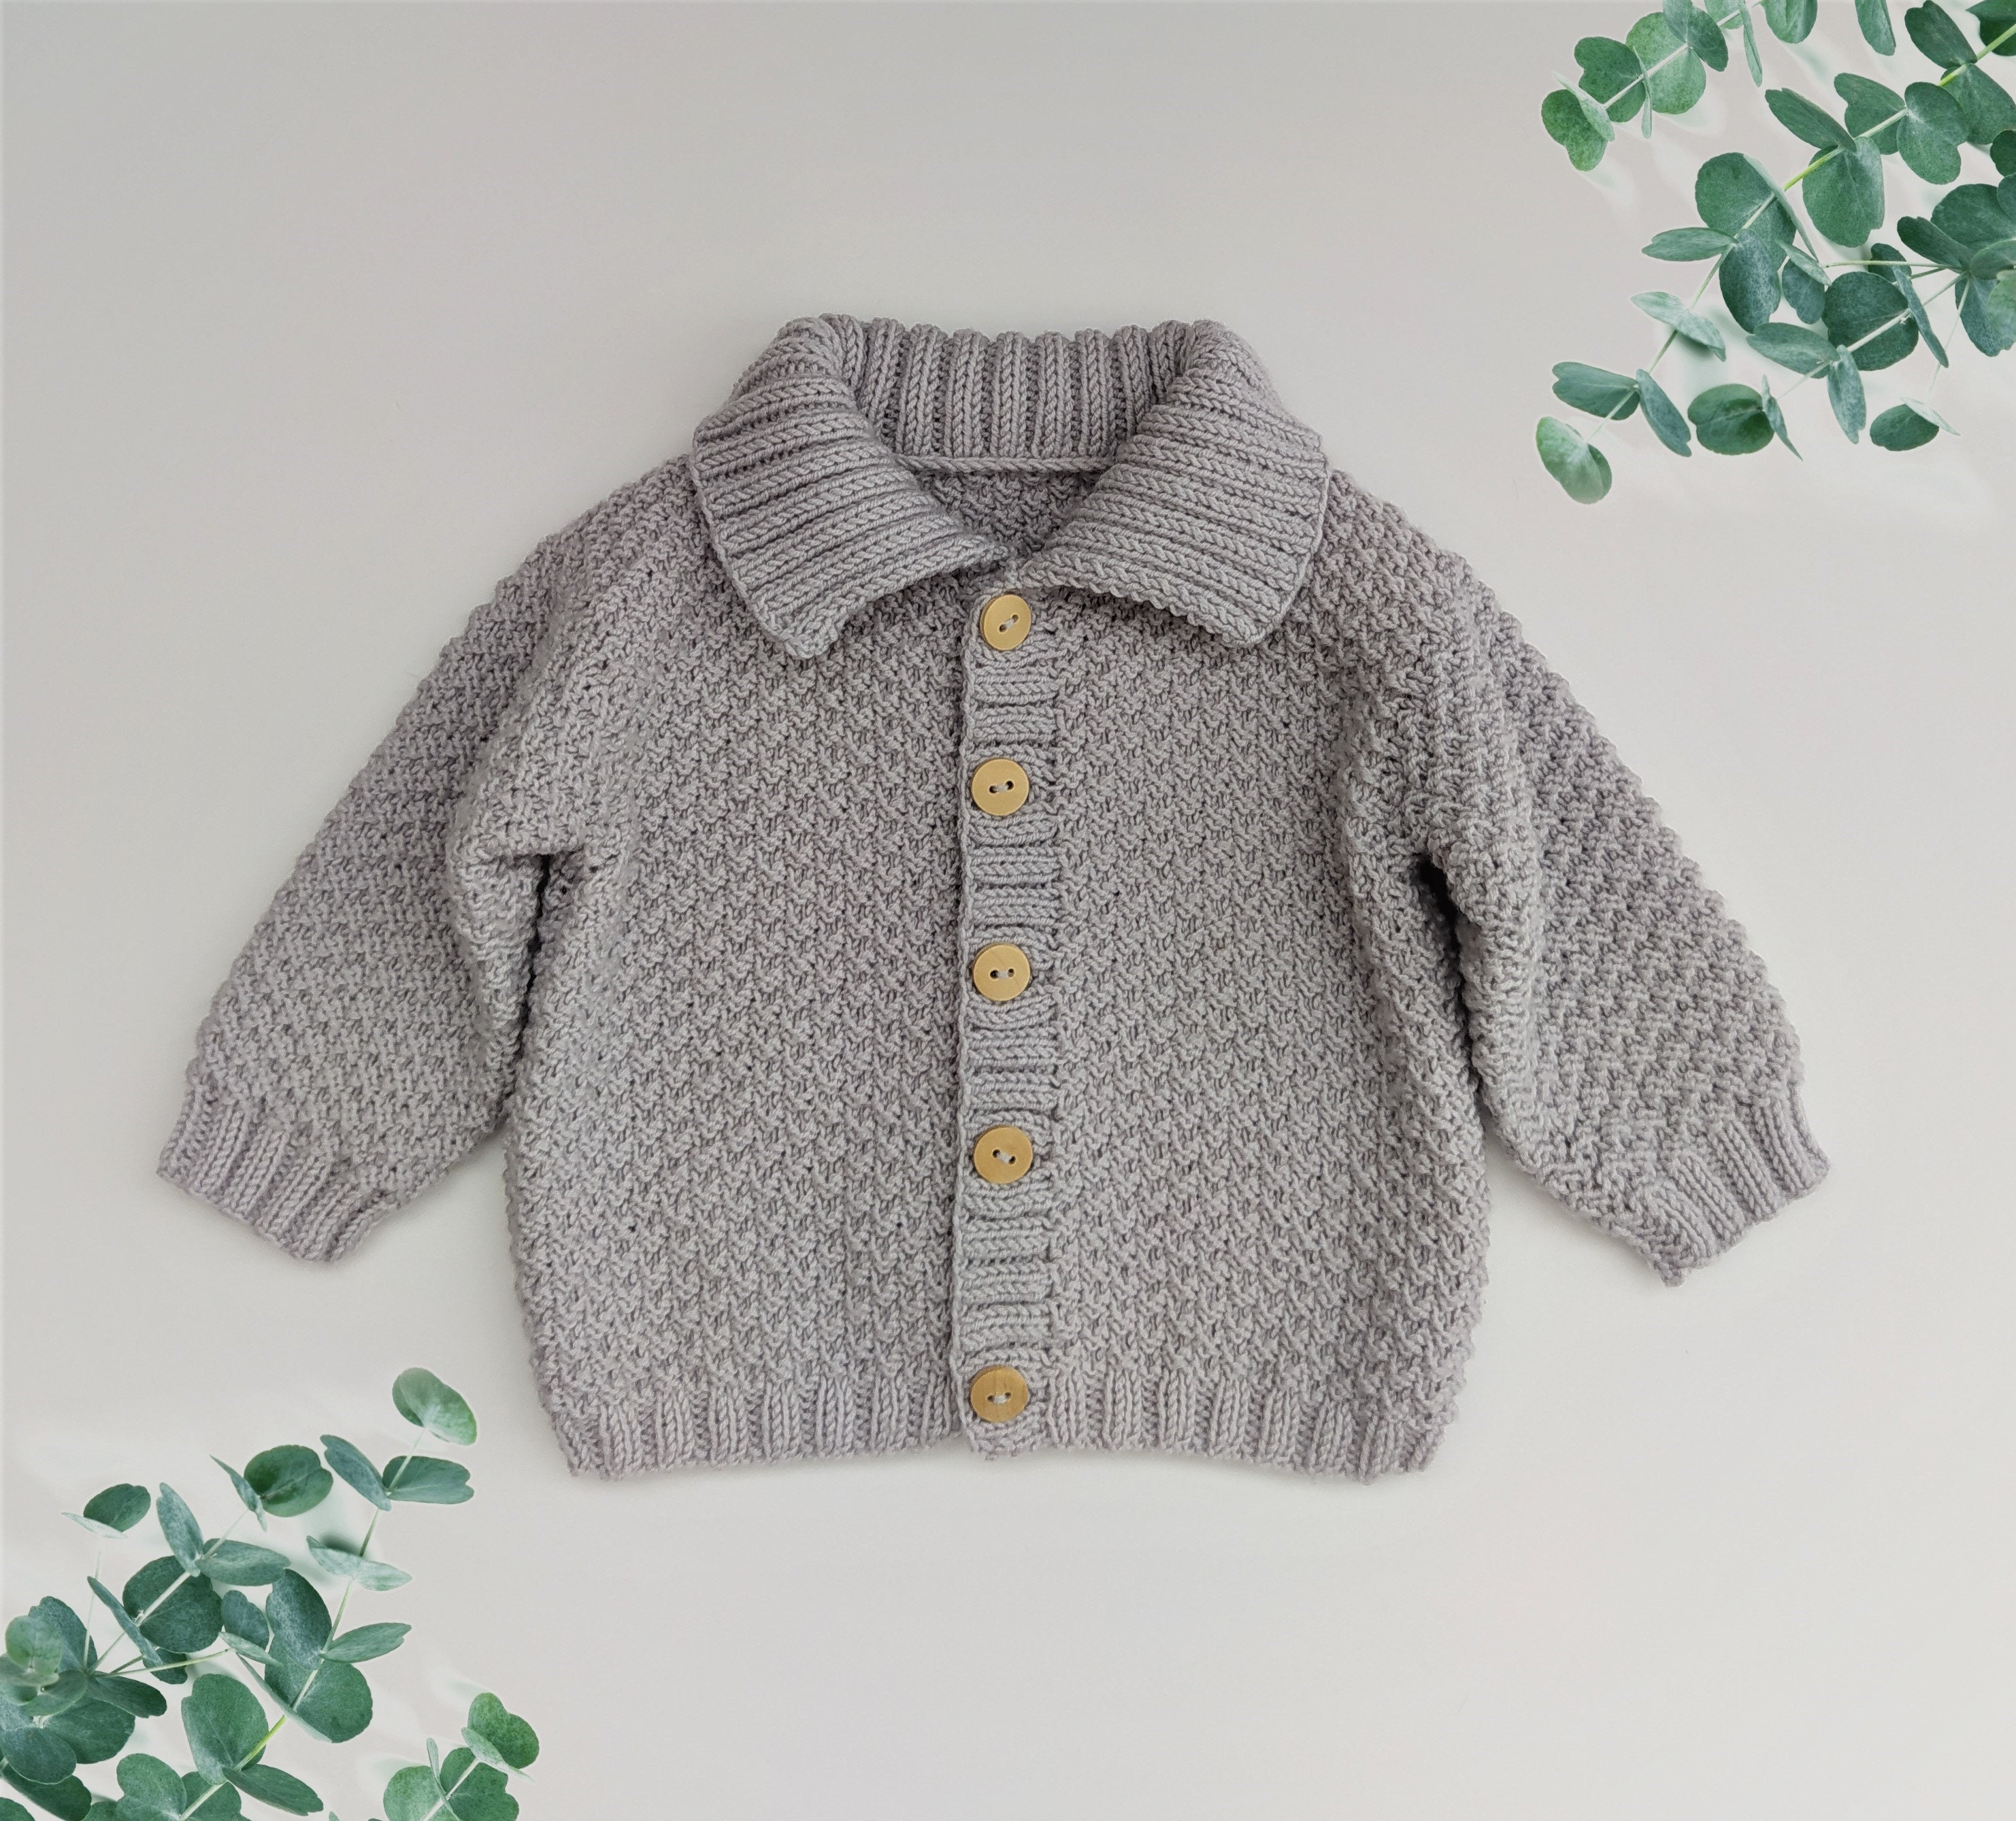 Baby Knitting Pattern Mossy Baby Cardigan Pants Bloomers | Etsy